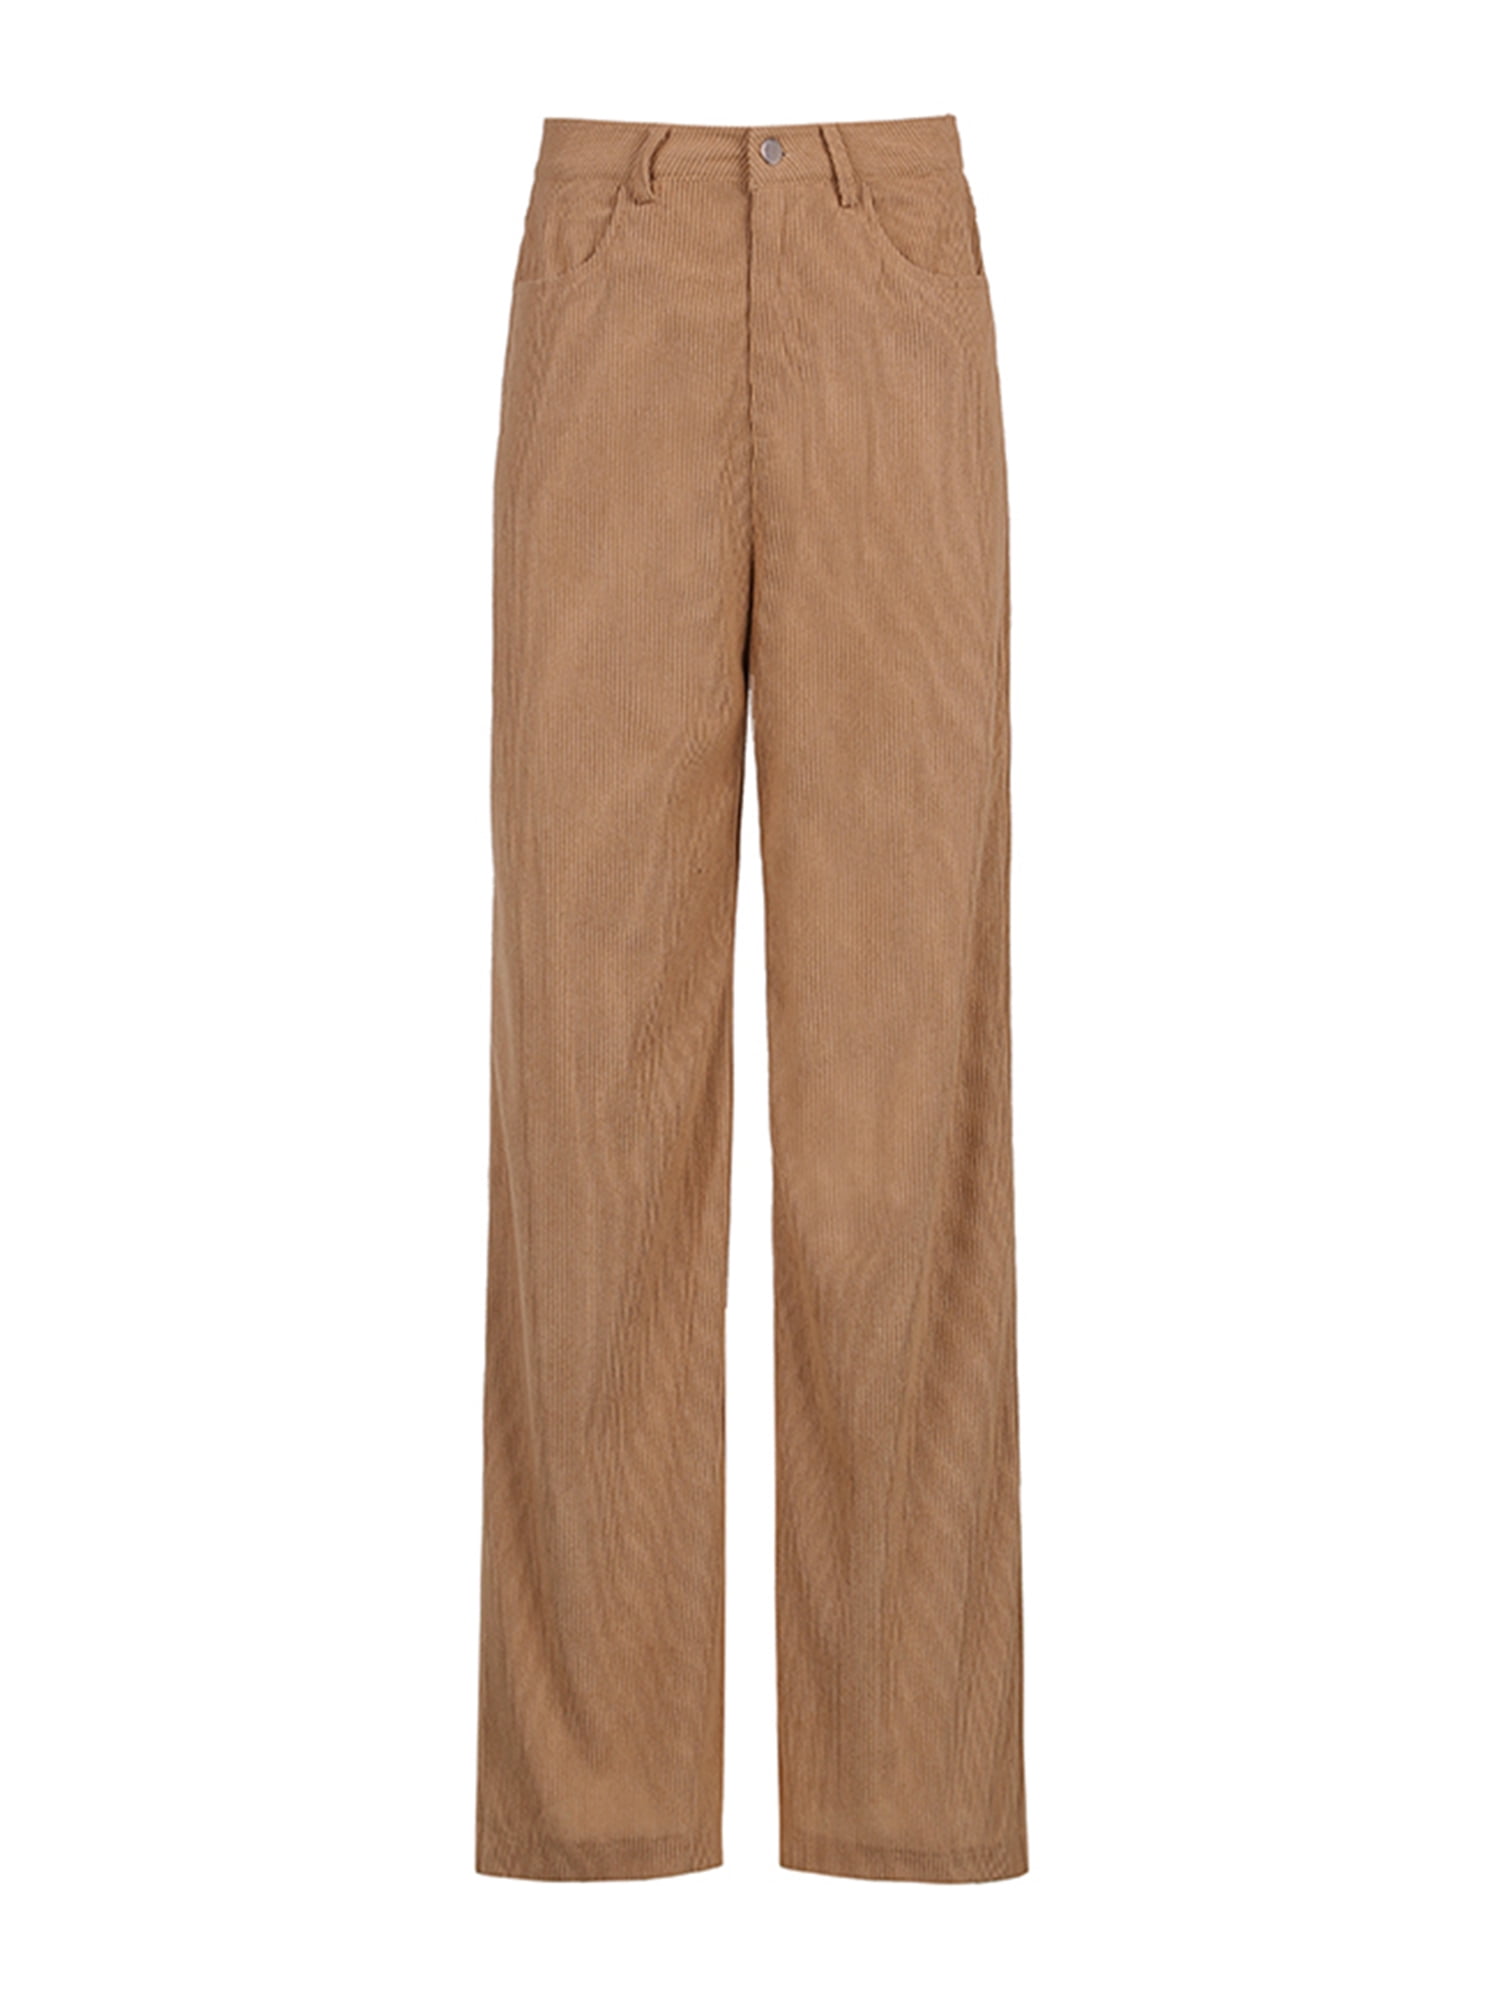 Womens Clothing Trousers ViCOLO Synthetic Trouser in Cocoa Slacks and Chinos Straight-leg trousers Brown 